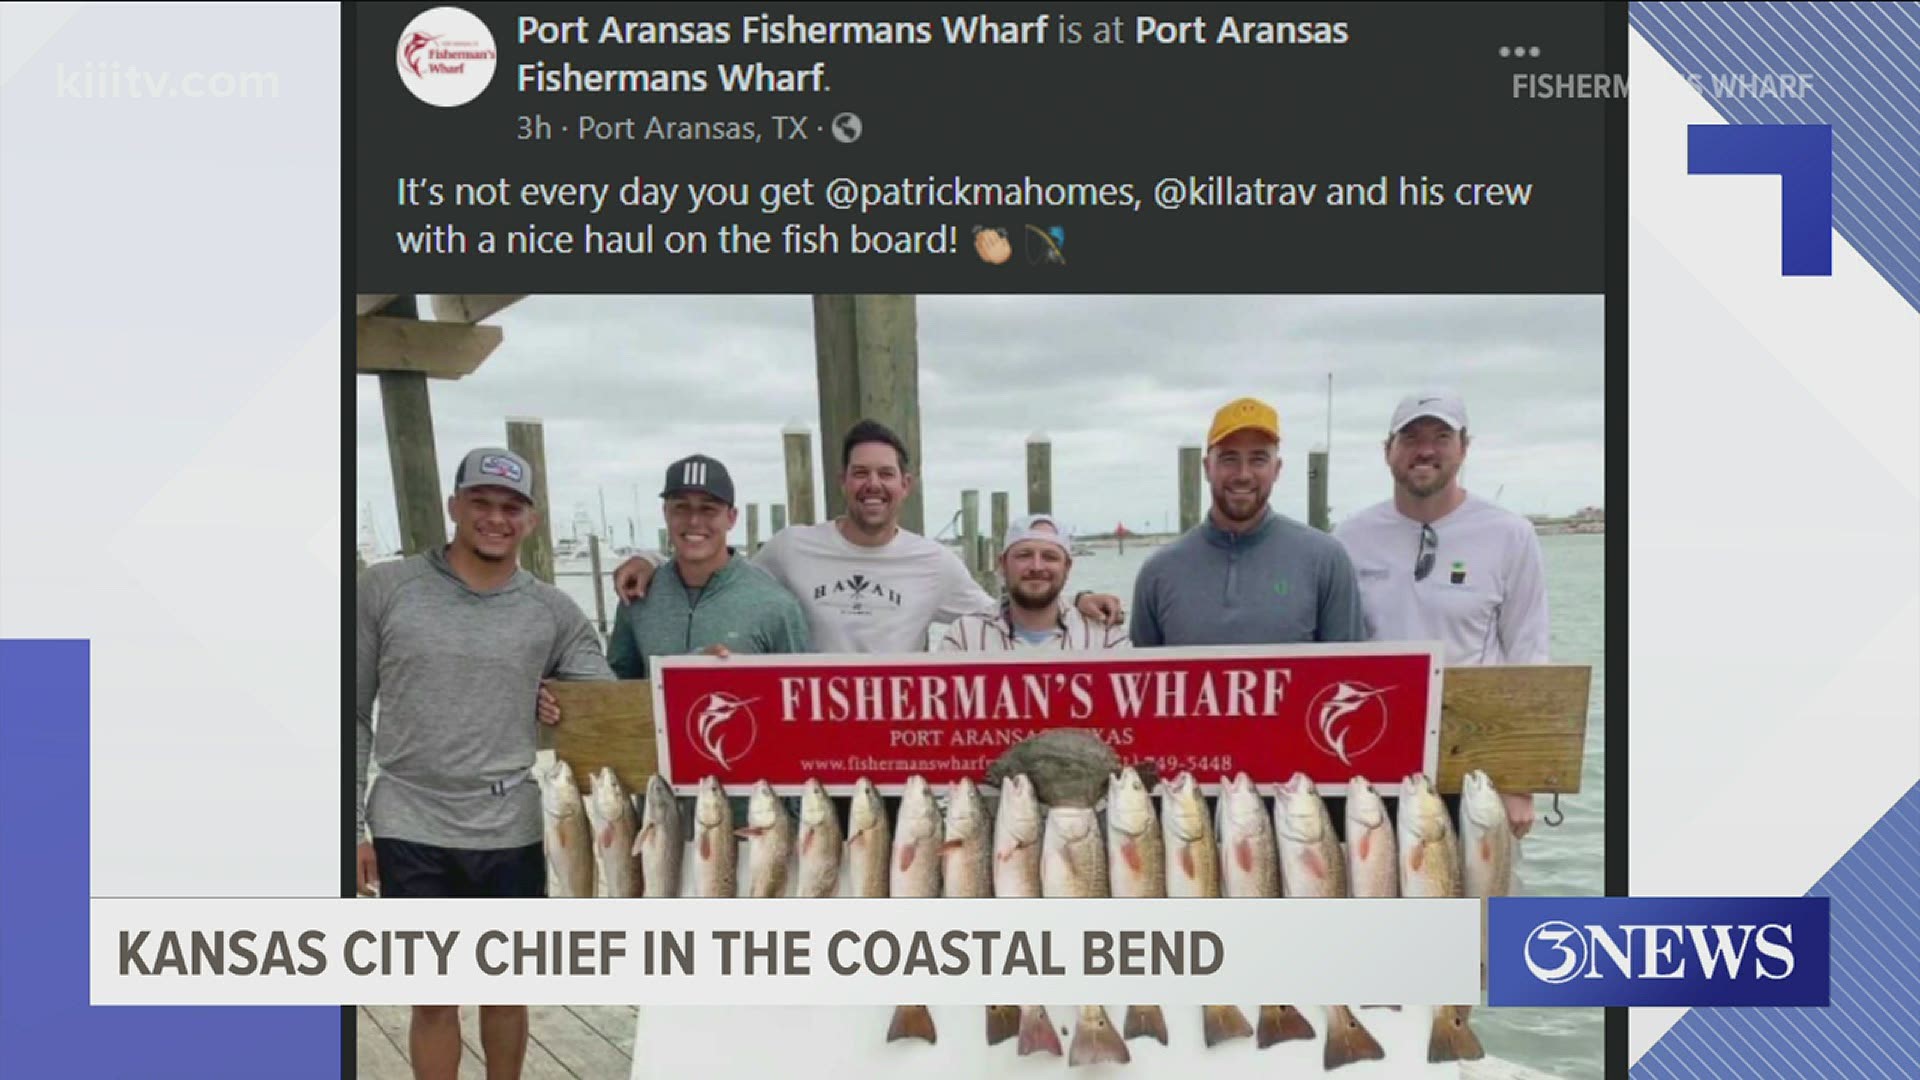 A photo shared by Port Aransas Fishermans Warf shows the football players posing with red drum fish.